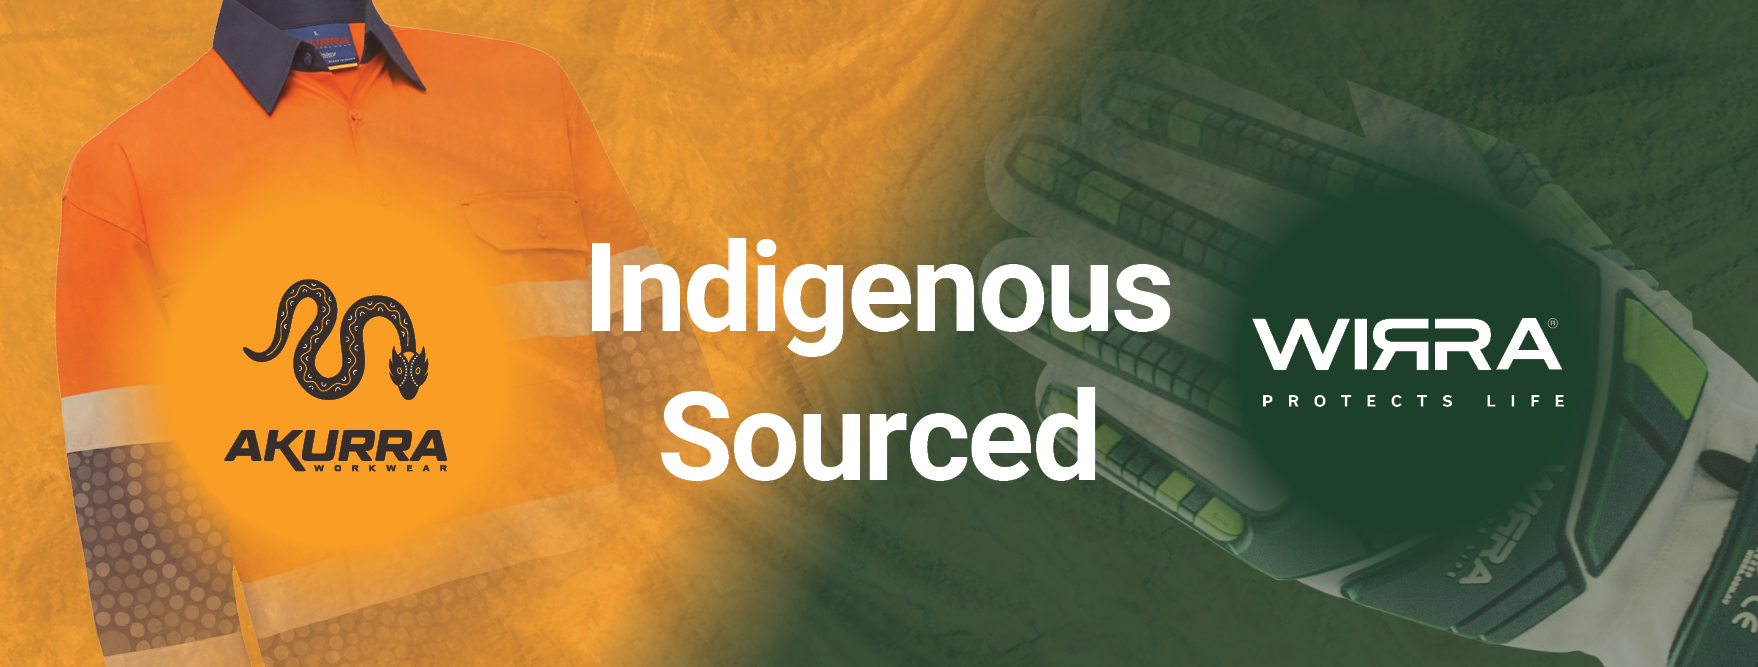 Indigenous Sourced Products